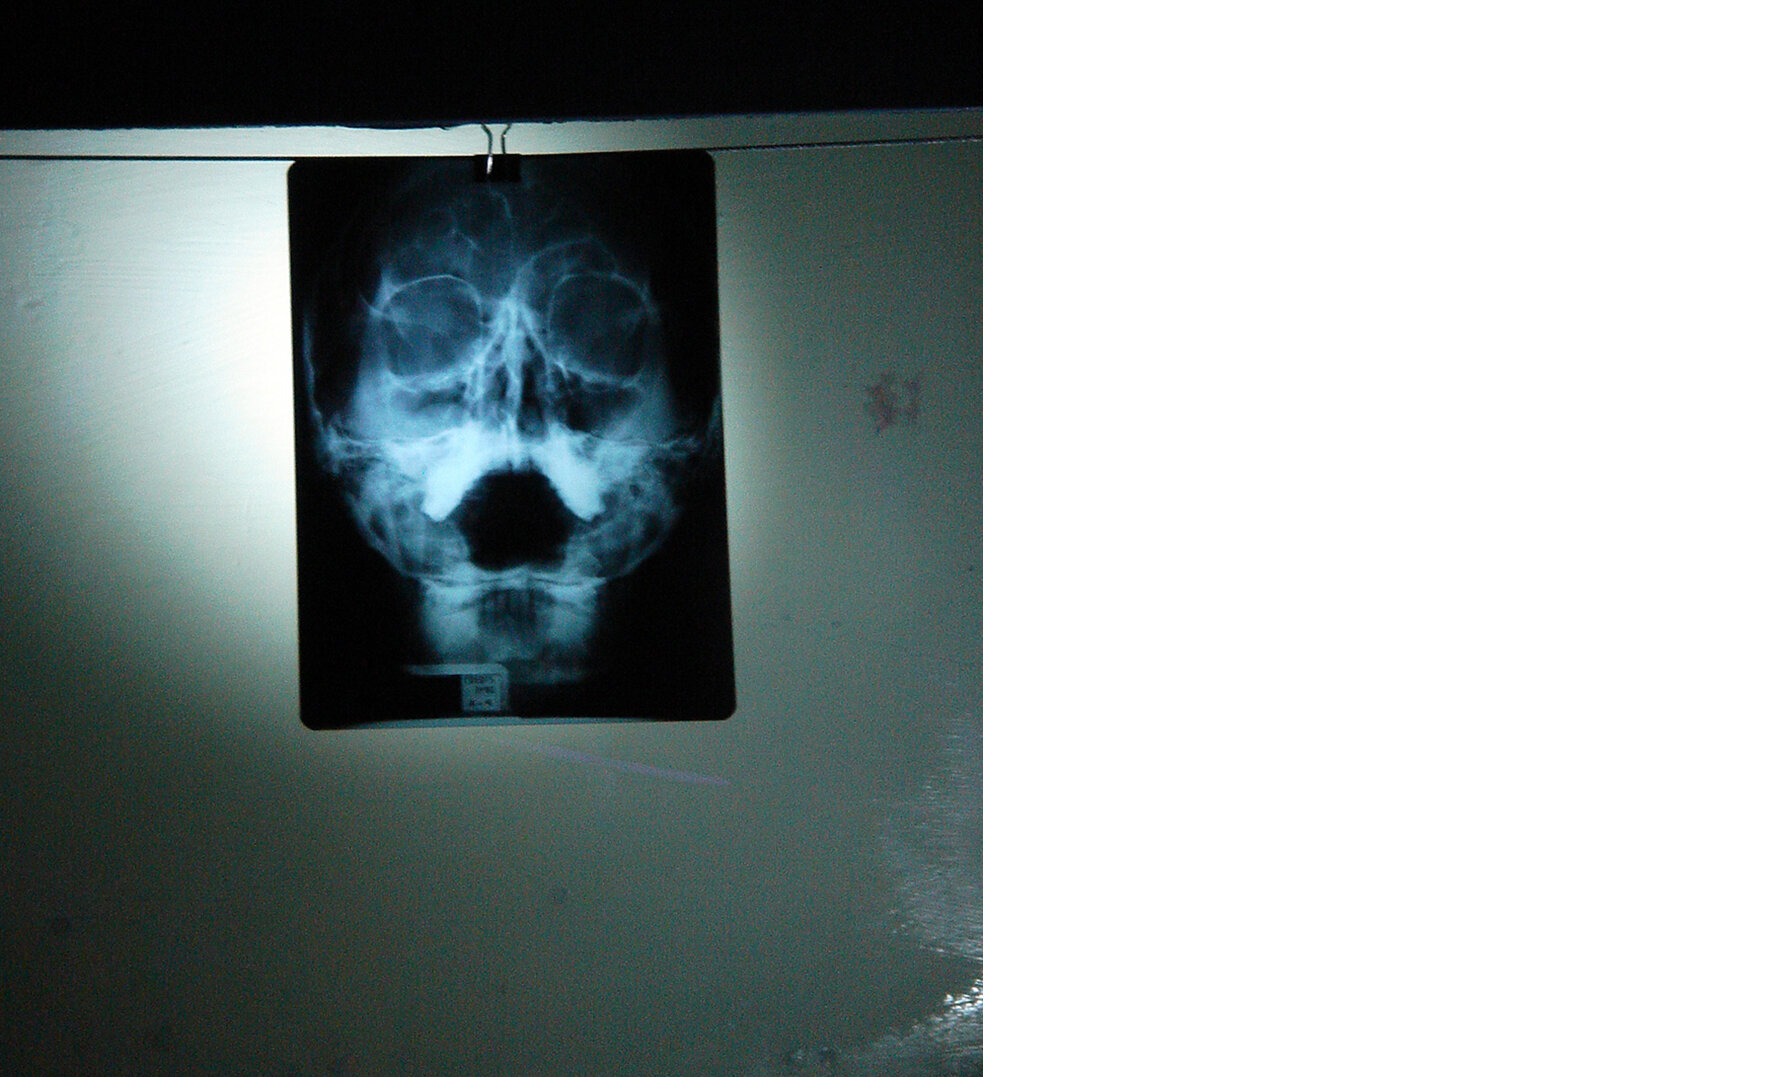   No Laughing matter (2007) Loïc Martin   Radiography, phosphorescent painting. Variable size installation (48,8 x 49,6 x 11,6 inches / 124 x 126 x 29,5 cm) 